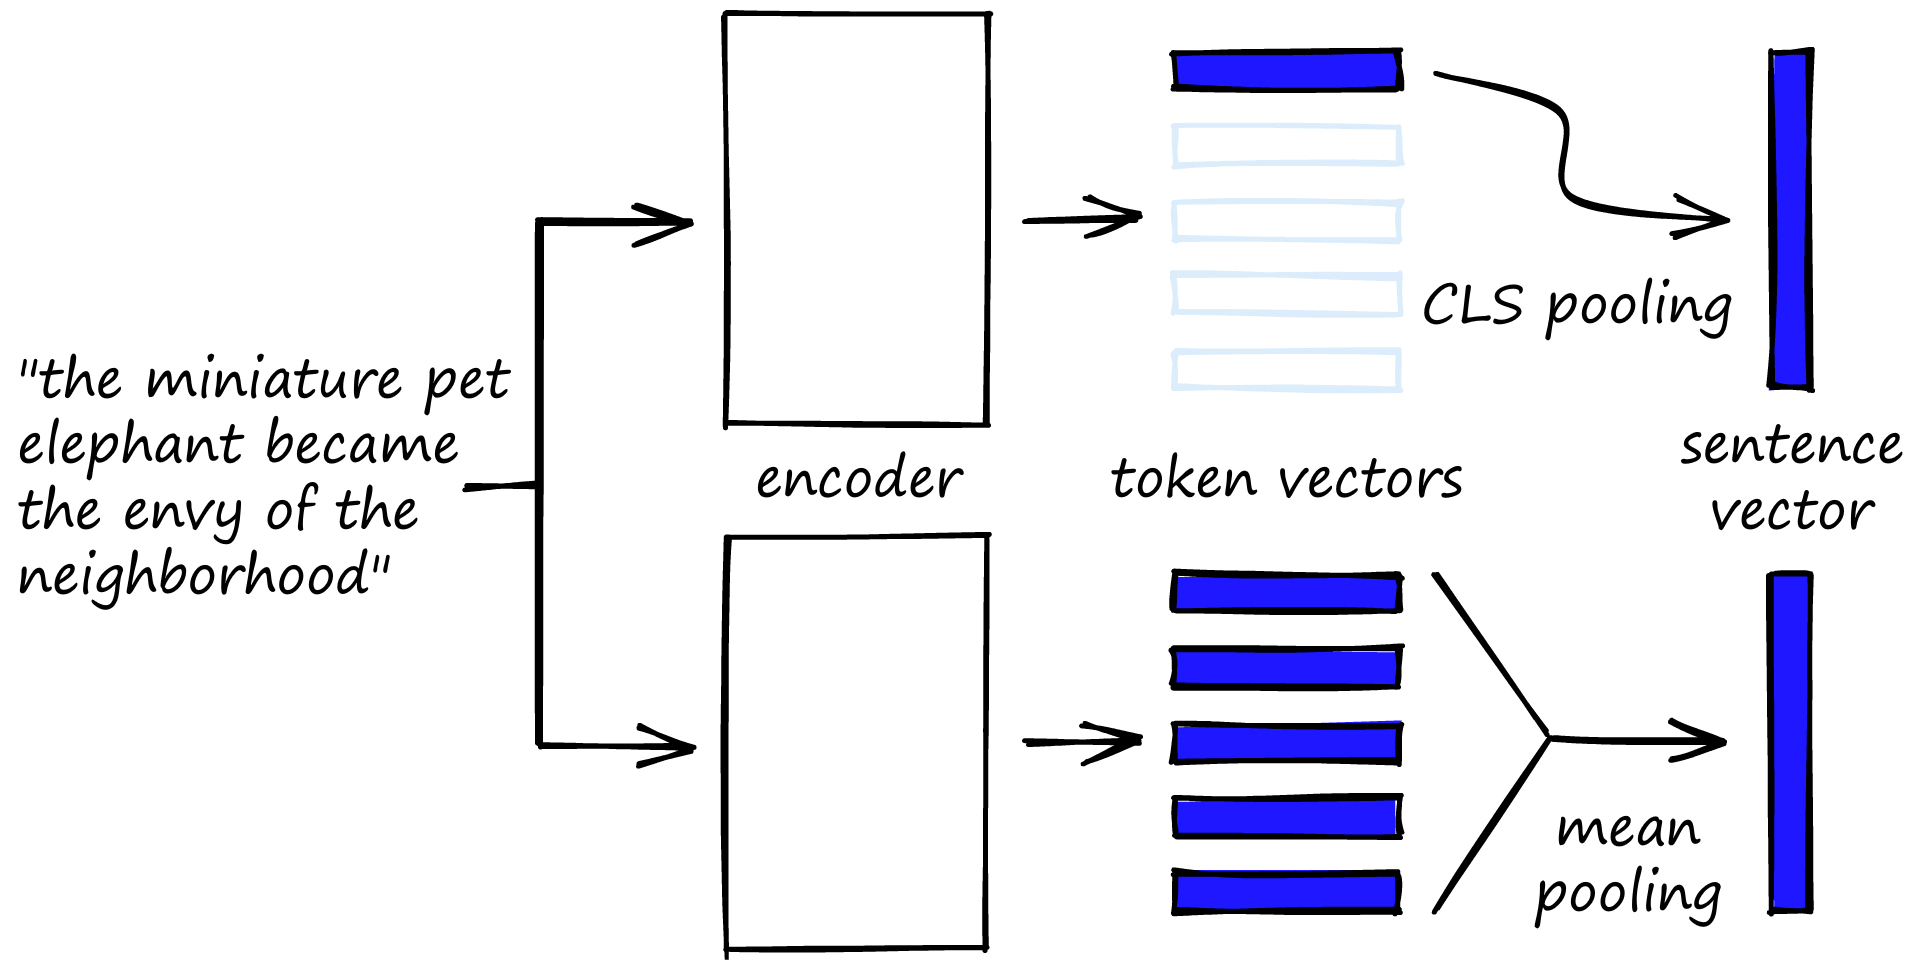 CLS token pooling (top) takes the CLS token vector and uses this as the sentence vector. Mean pooling (bottom) takes the average value across all token vectors to create a sentence vector.